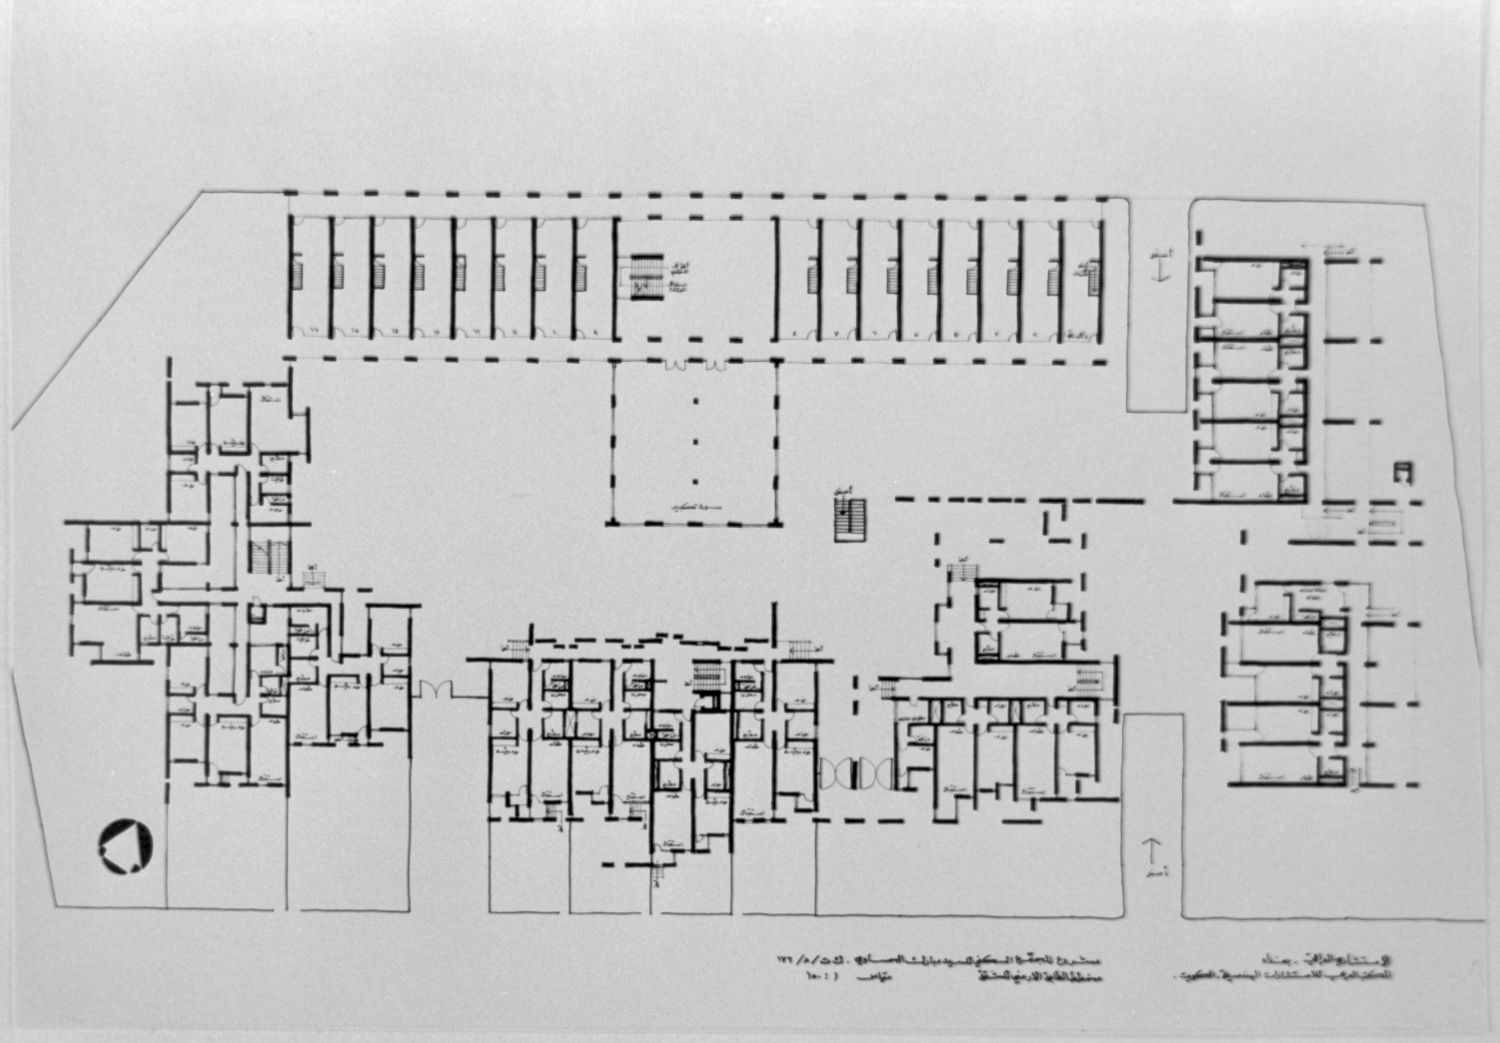 Ground floor plan (possibly an early version not adopted in final construction).